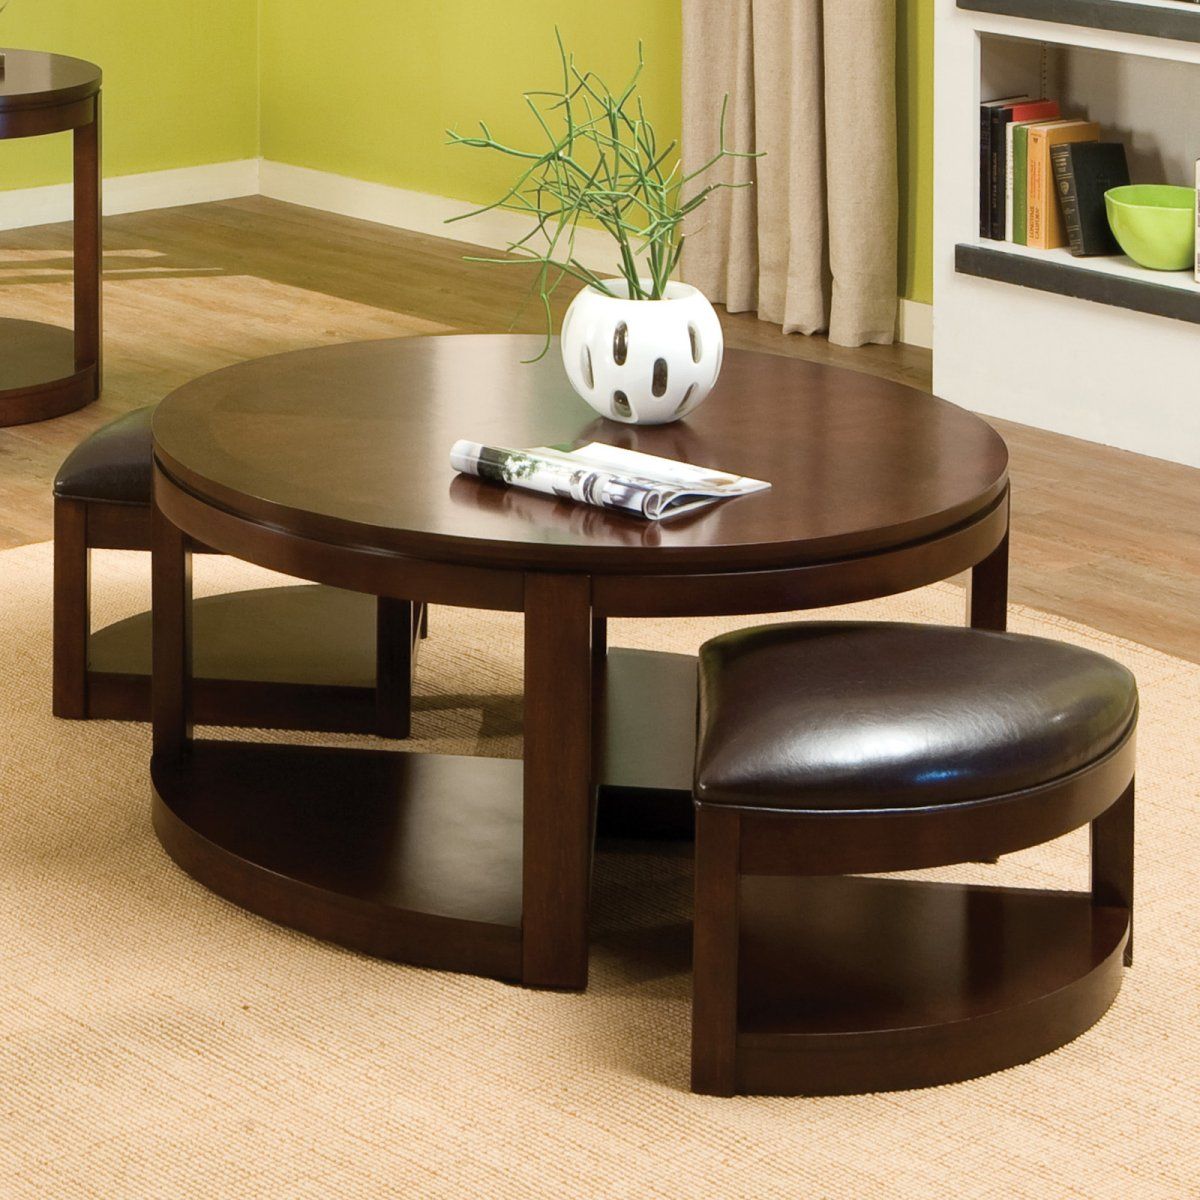 The Round Coffee Tables With Storage – The Simple And Compact Furniture Pertaining To Round Coffee Tables With Storage (View 5 of 20)